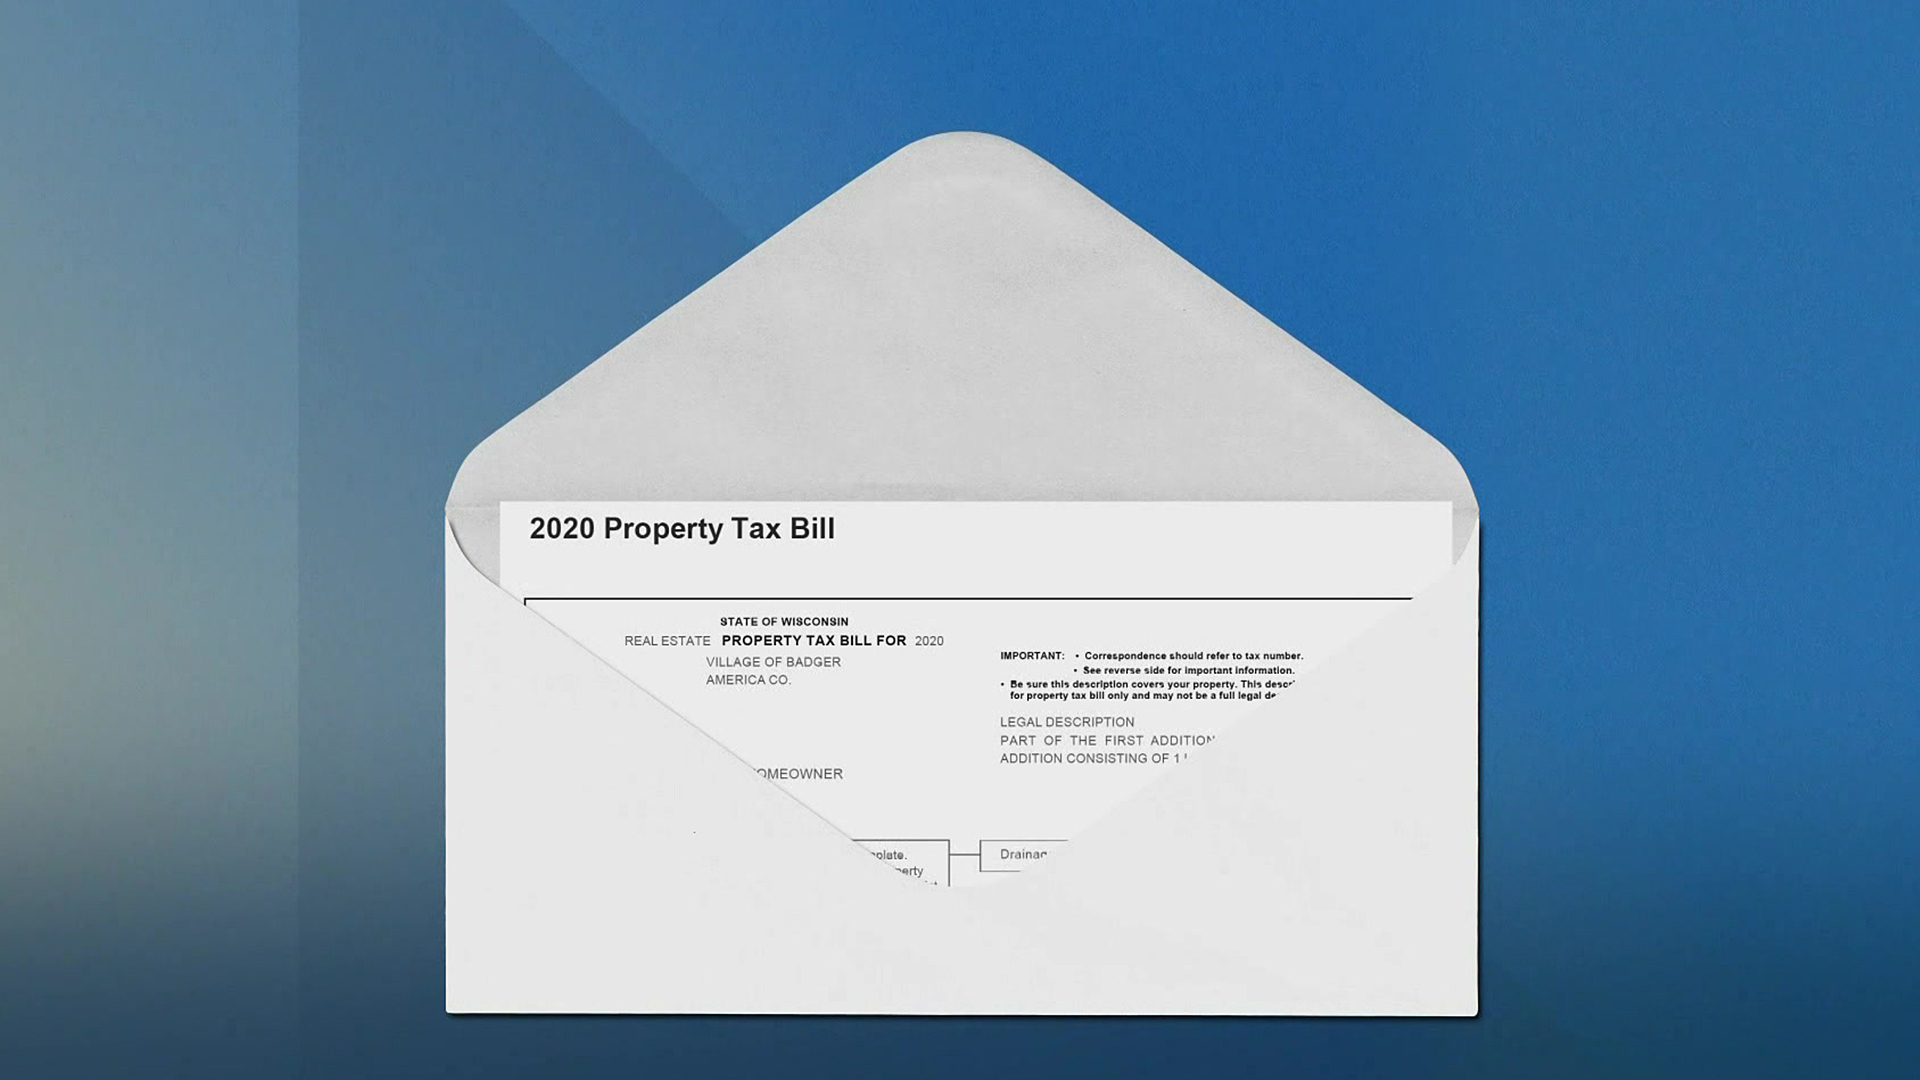 An illustration shows an open envelope with a document inside labeled "2020 Property Tax Bill."